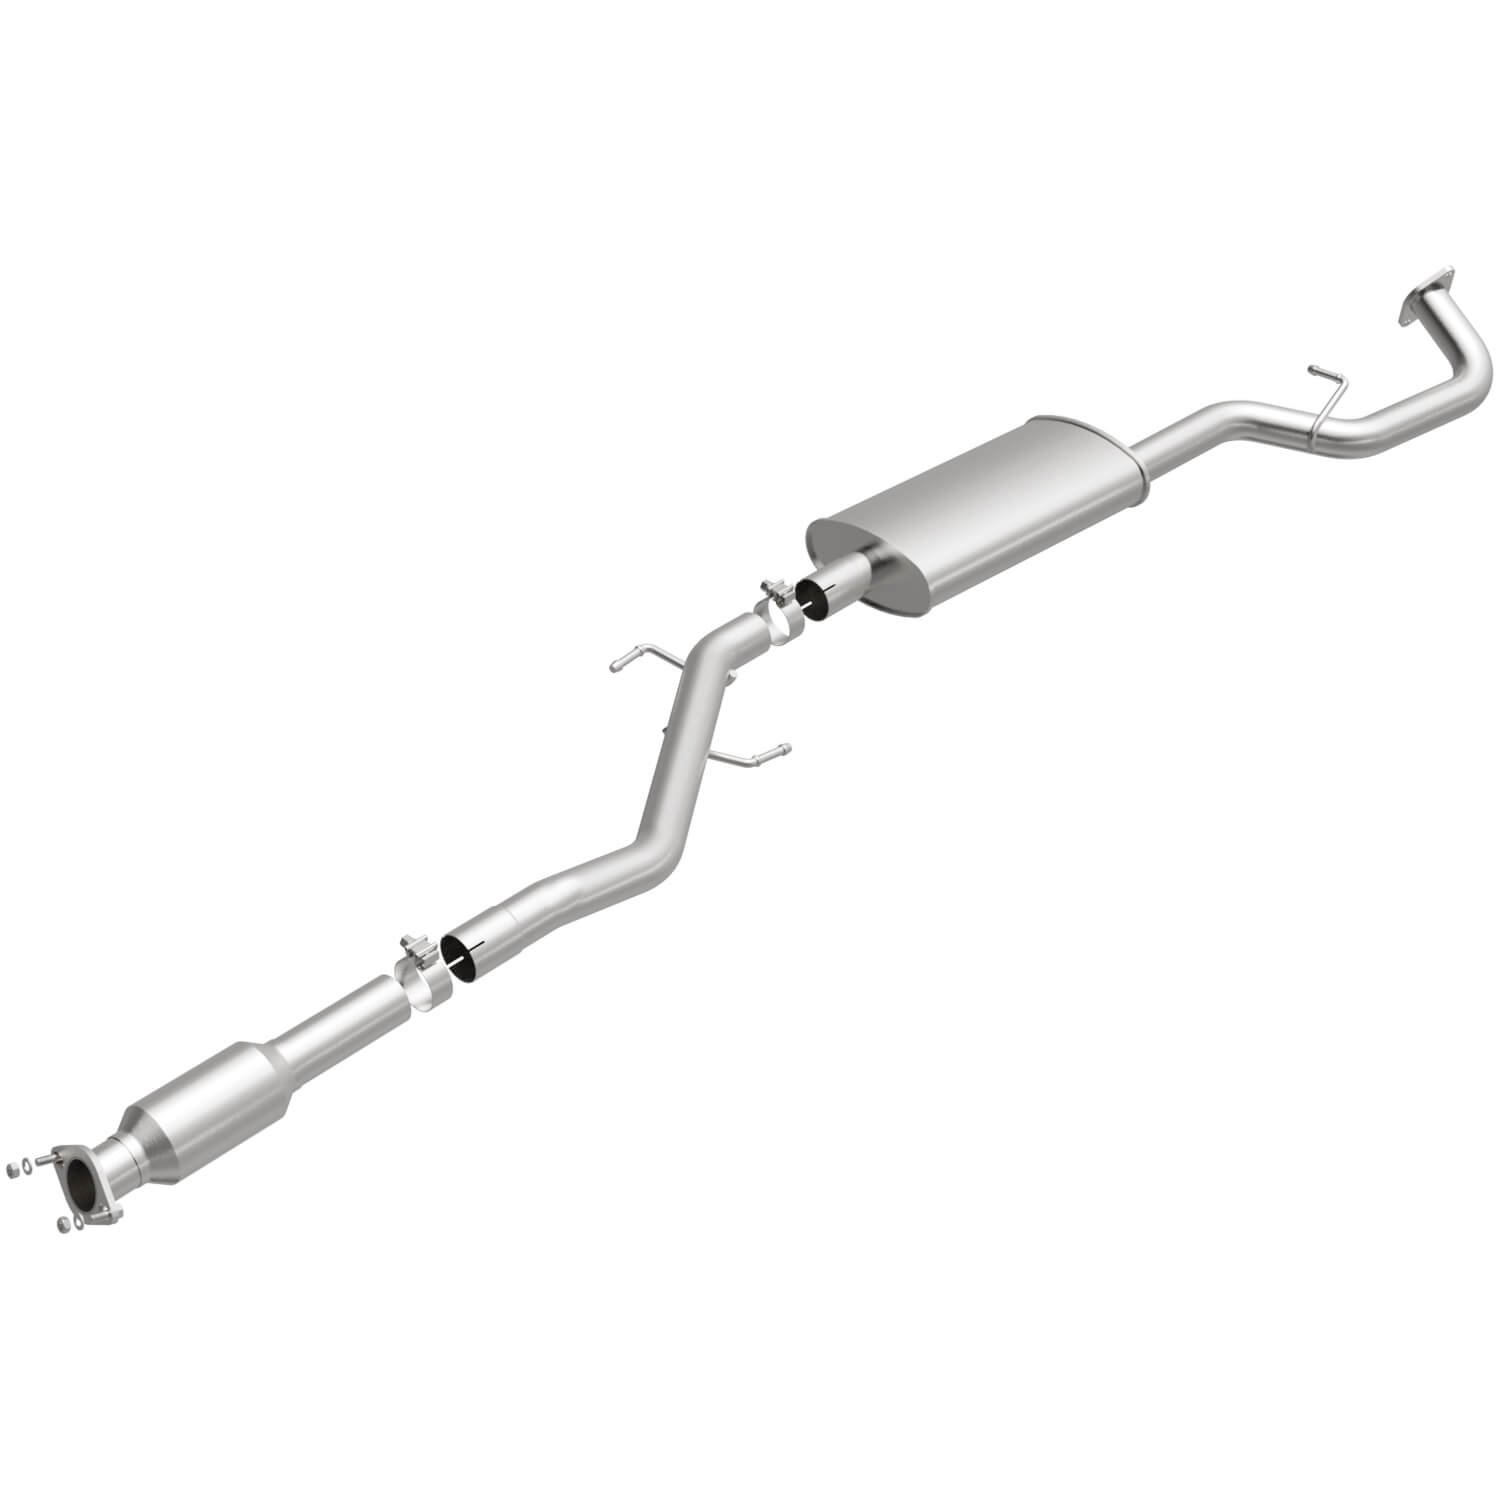 OEM Grade Federal / EPA Compliant Direct-Fit Catalytic Converter 21-142